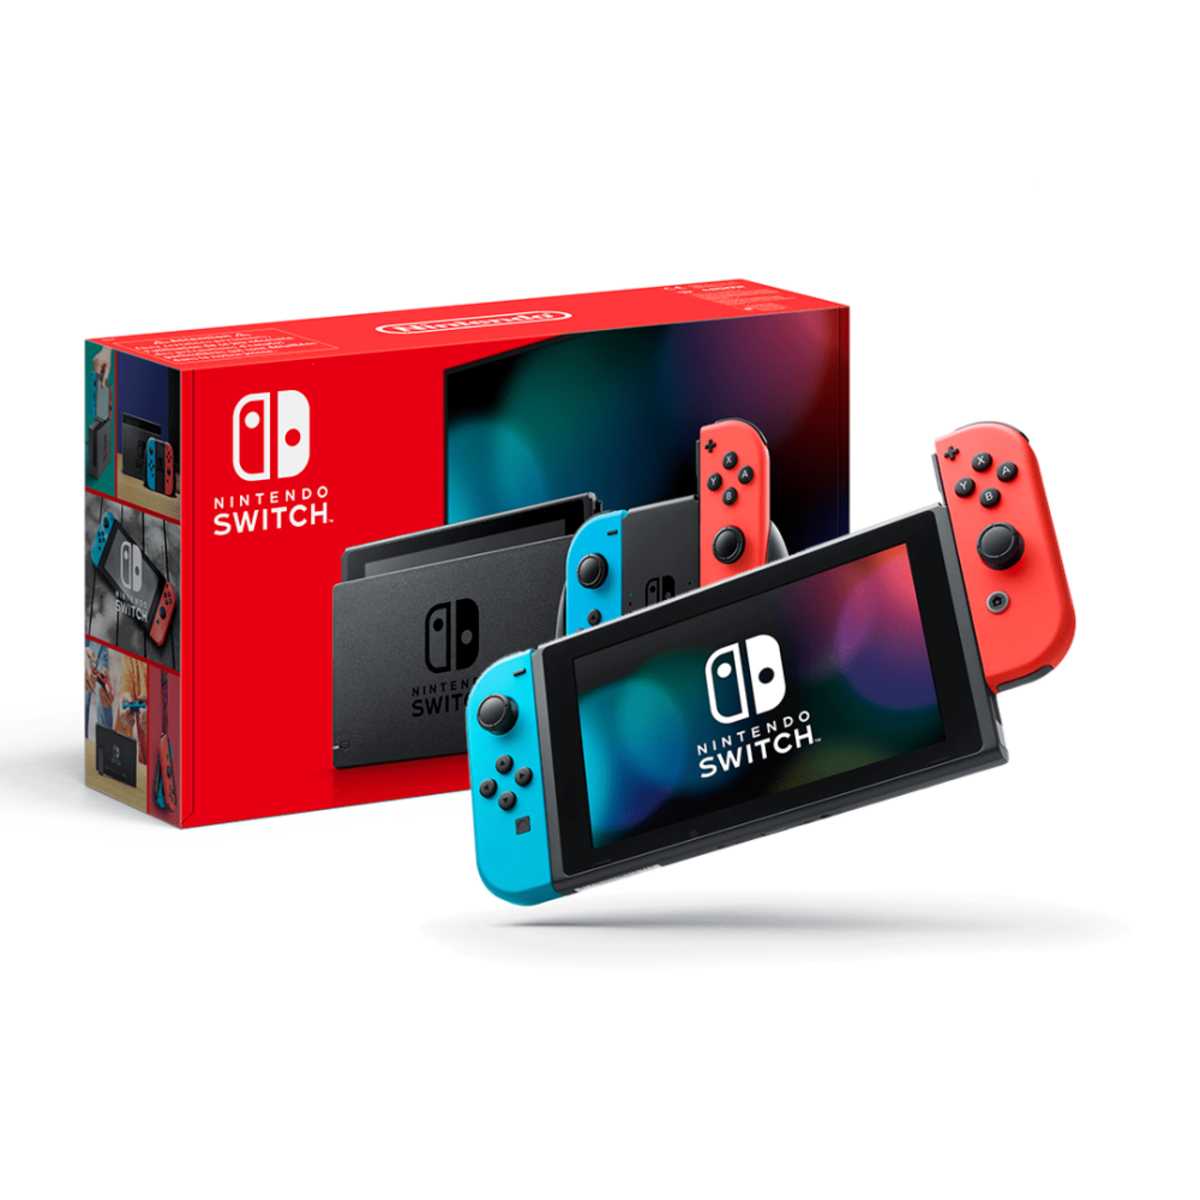 Nintendo Switch Console – Neon Red & Blue